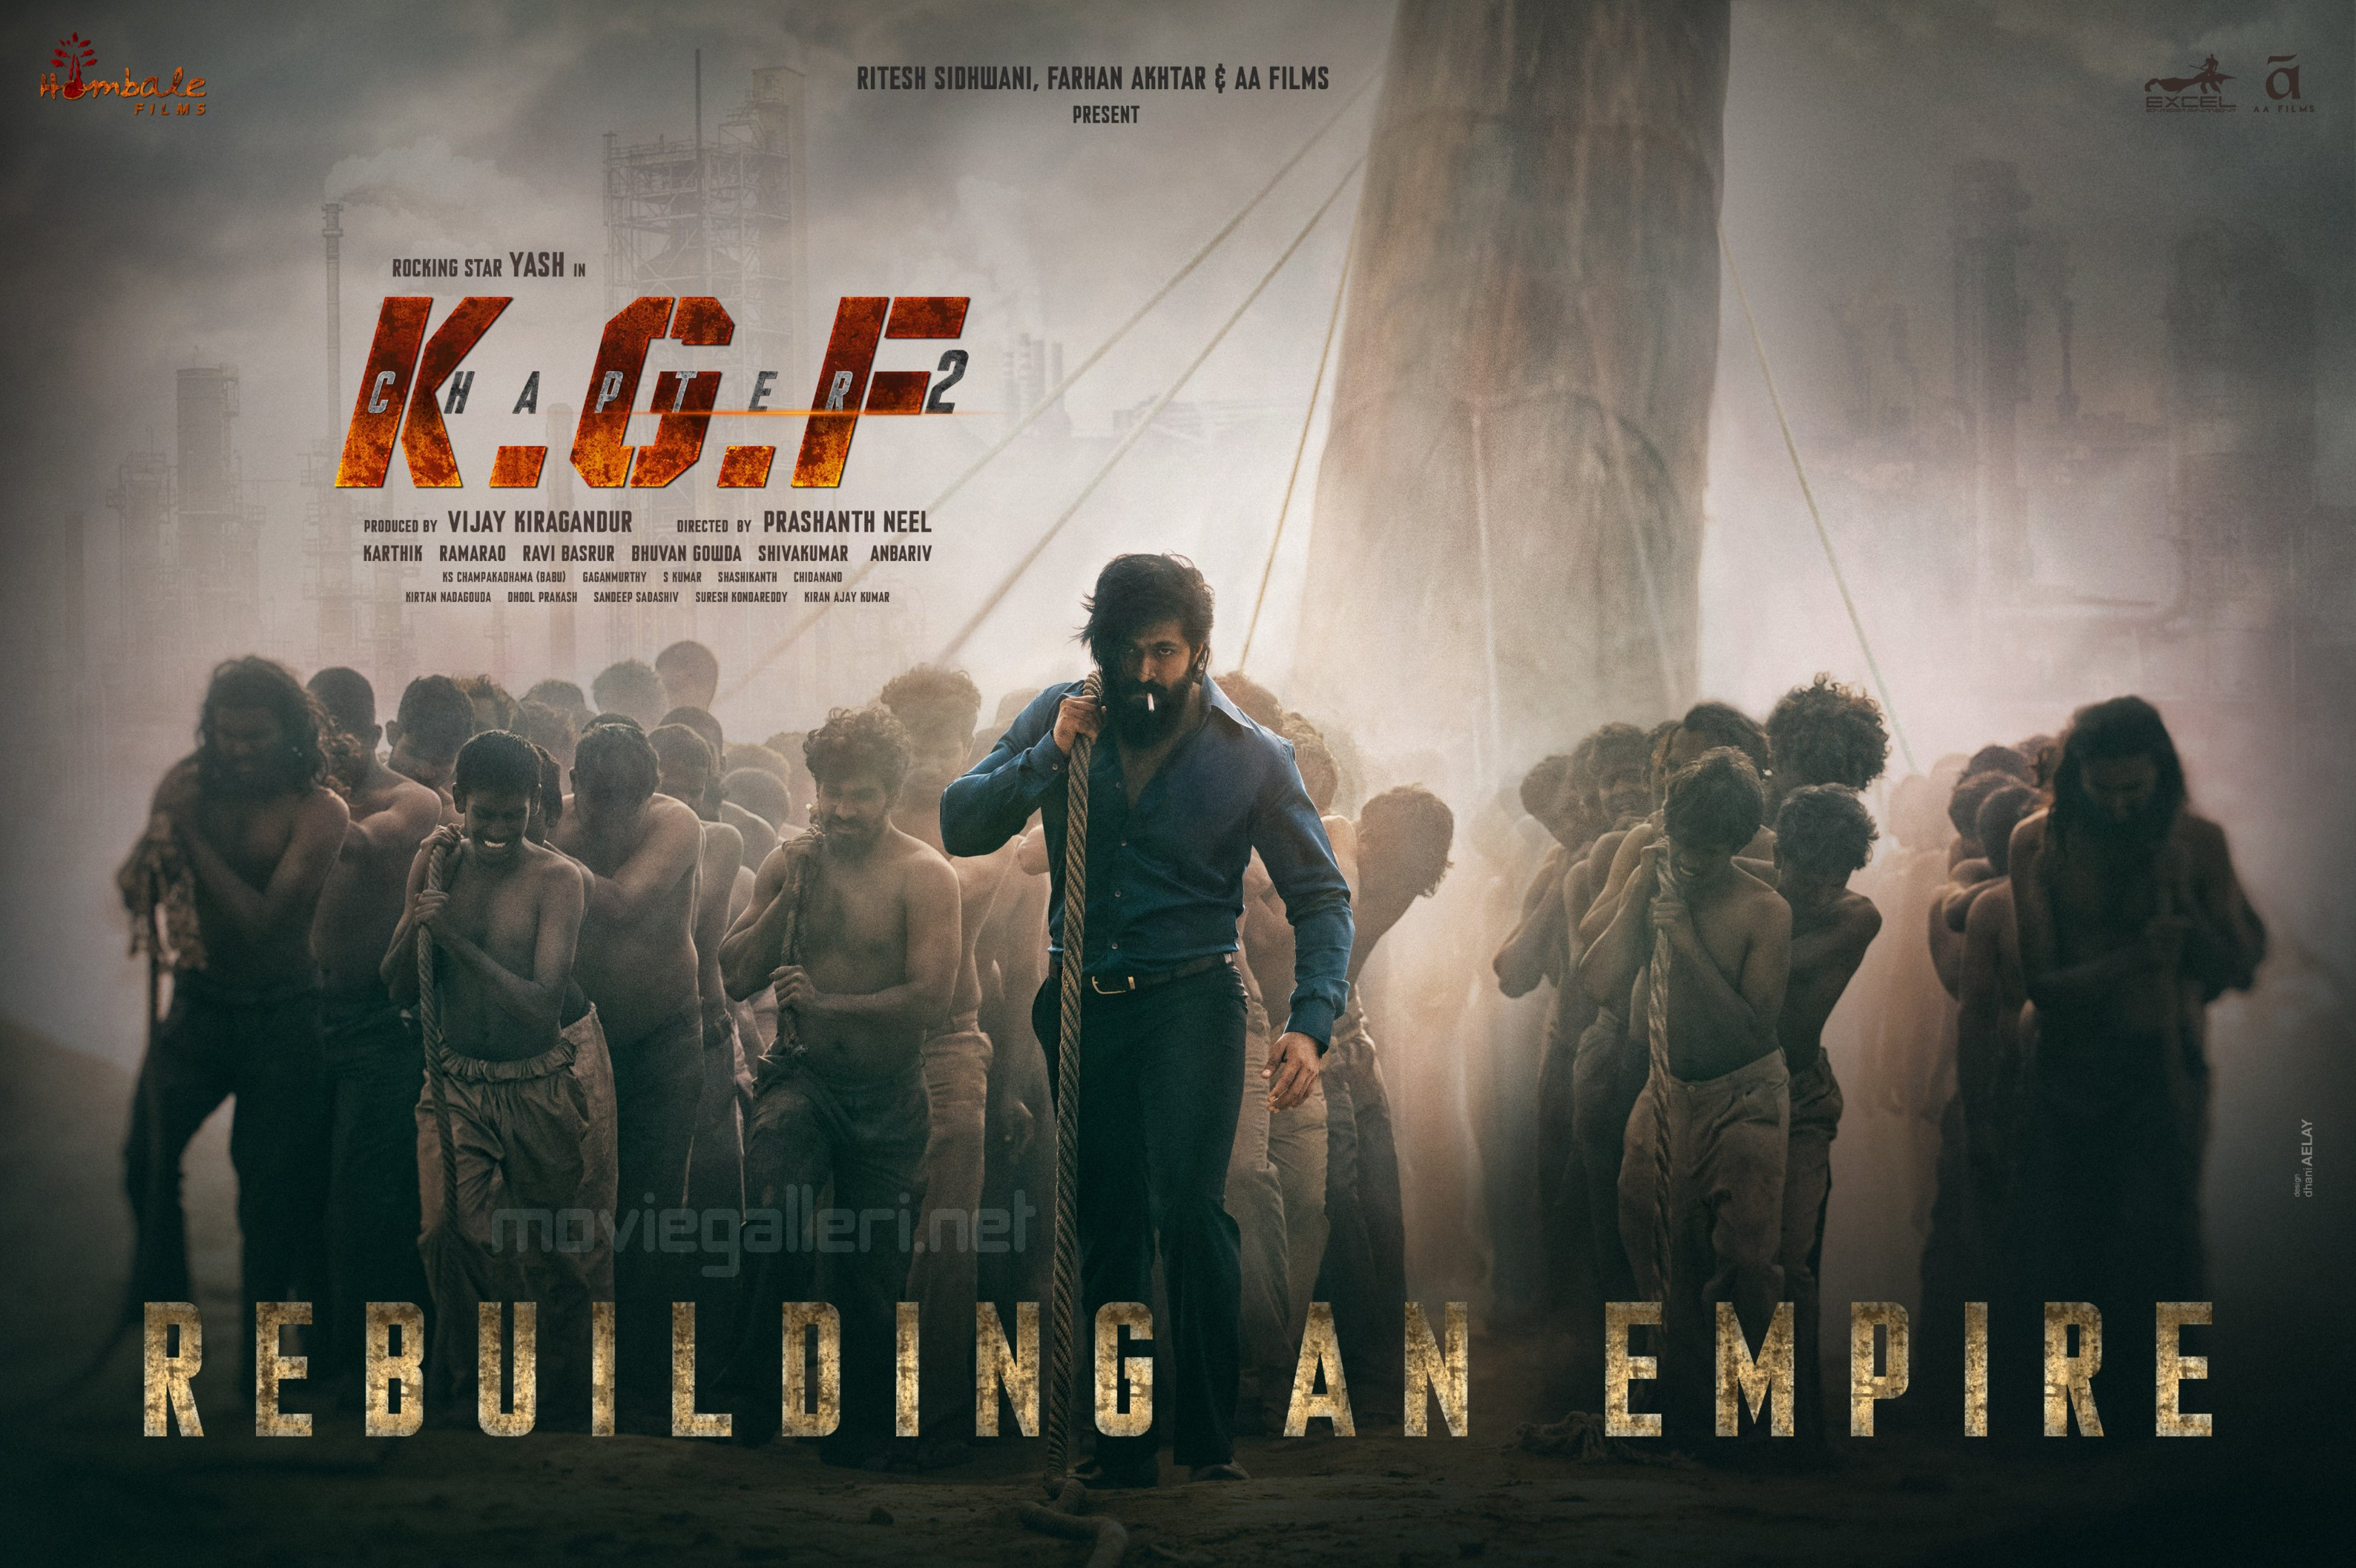 Yash Kgf Chapter 2 First Look Poster Hd New Movie Posters